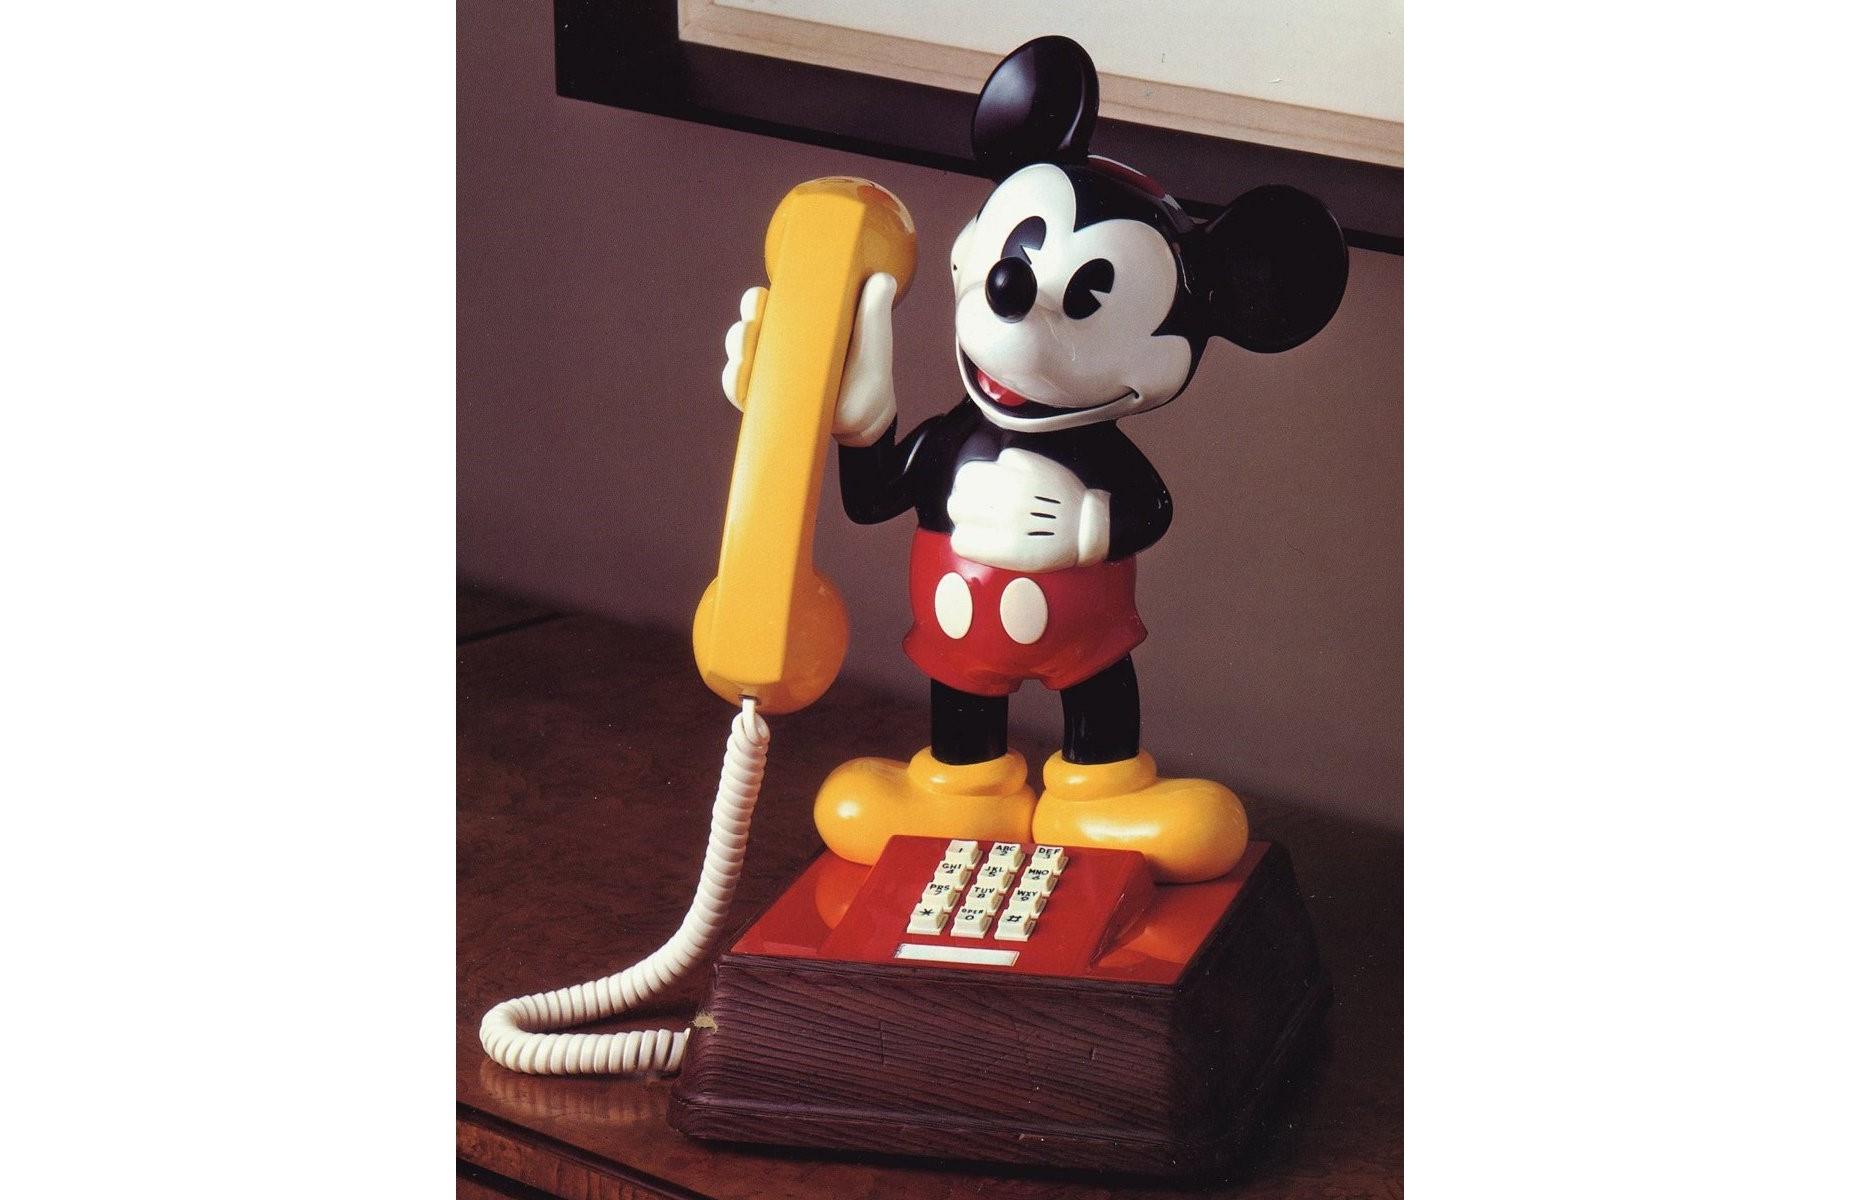 ATC Mickey Mouse push-button telephone: up to $150 (£116)